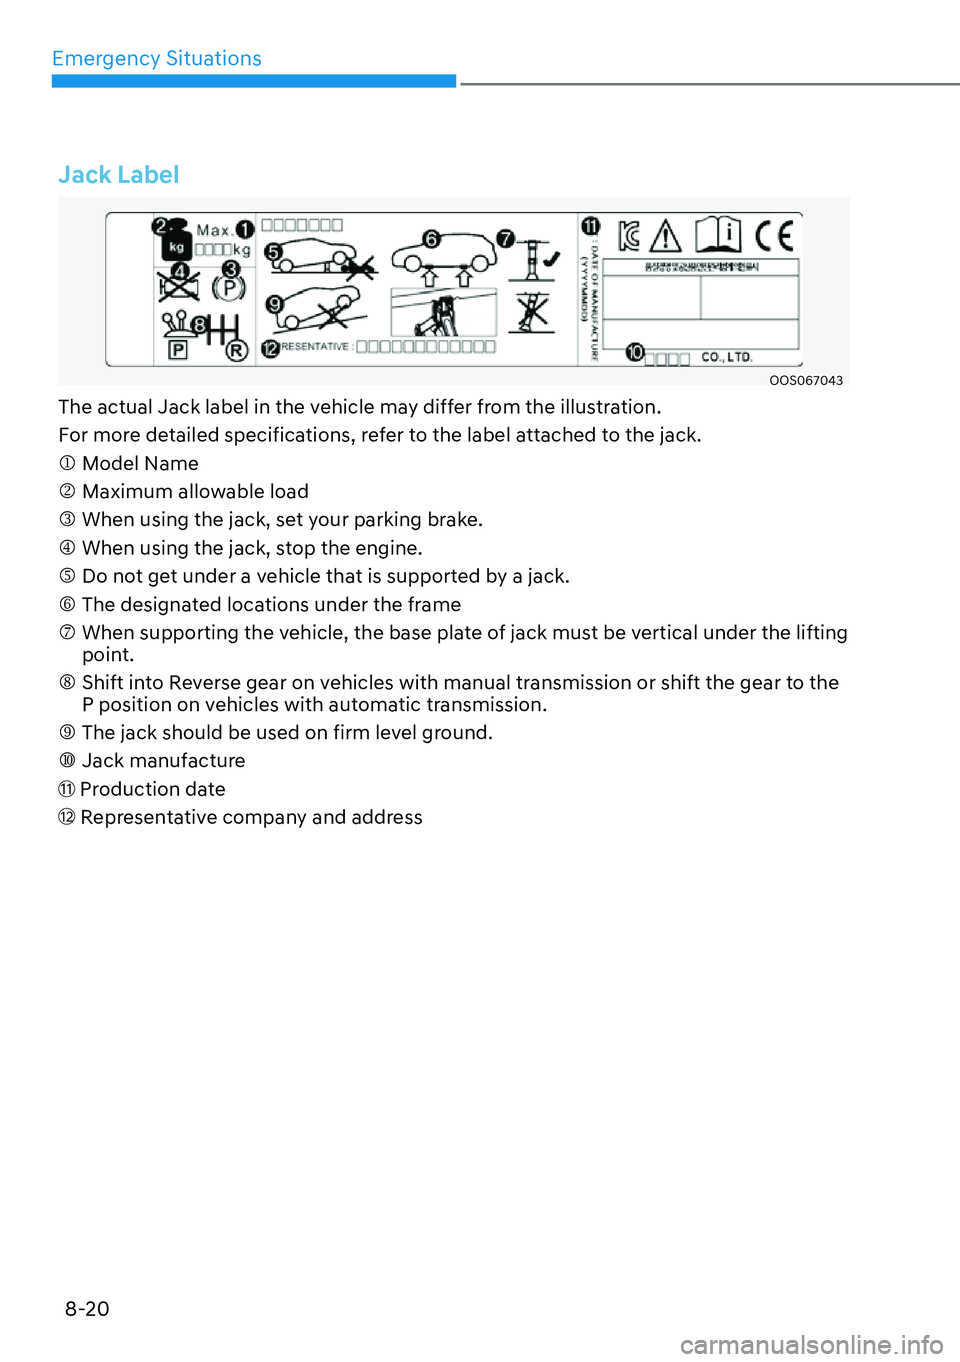 HYUNDAI PALISADE 2023  Owners Manual Emergency Situations8-20
Jack Label
OOS067043
The actual Jack label in the vehicle may differ from the illustration.
For more detailed specifications, refer to the label attached to the jack.
�M Model